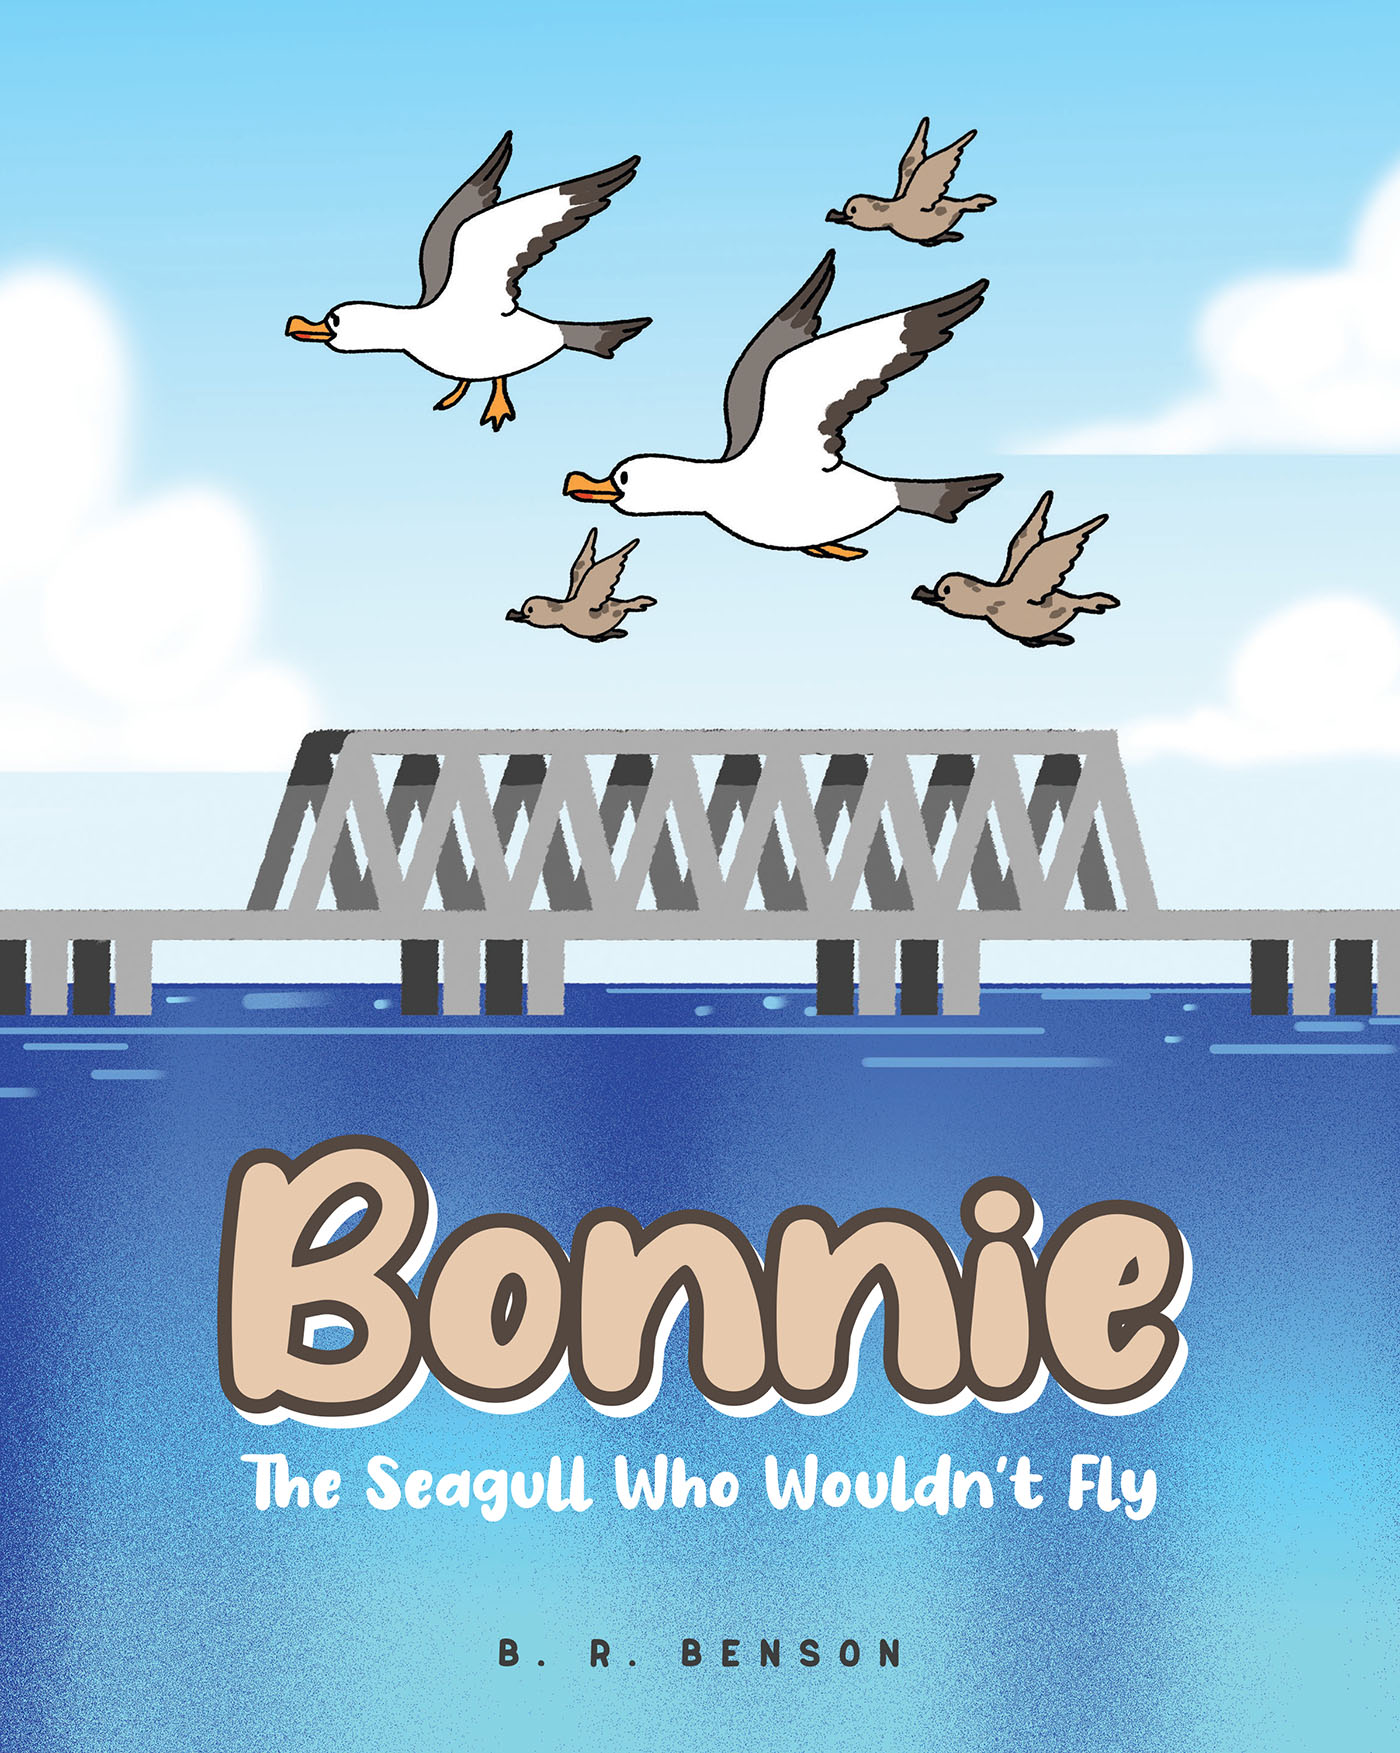 Author B. R. Benson’s New Book, "Bonnie: The Seagull Who Wouldn't Fly," Centers Around a Seagull Who Must Overcome Her Fears if She Ever Hopes to Fly Like Her Family